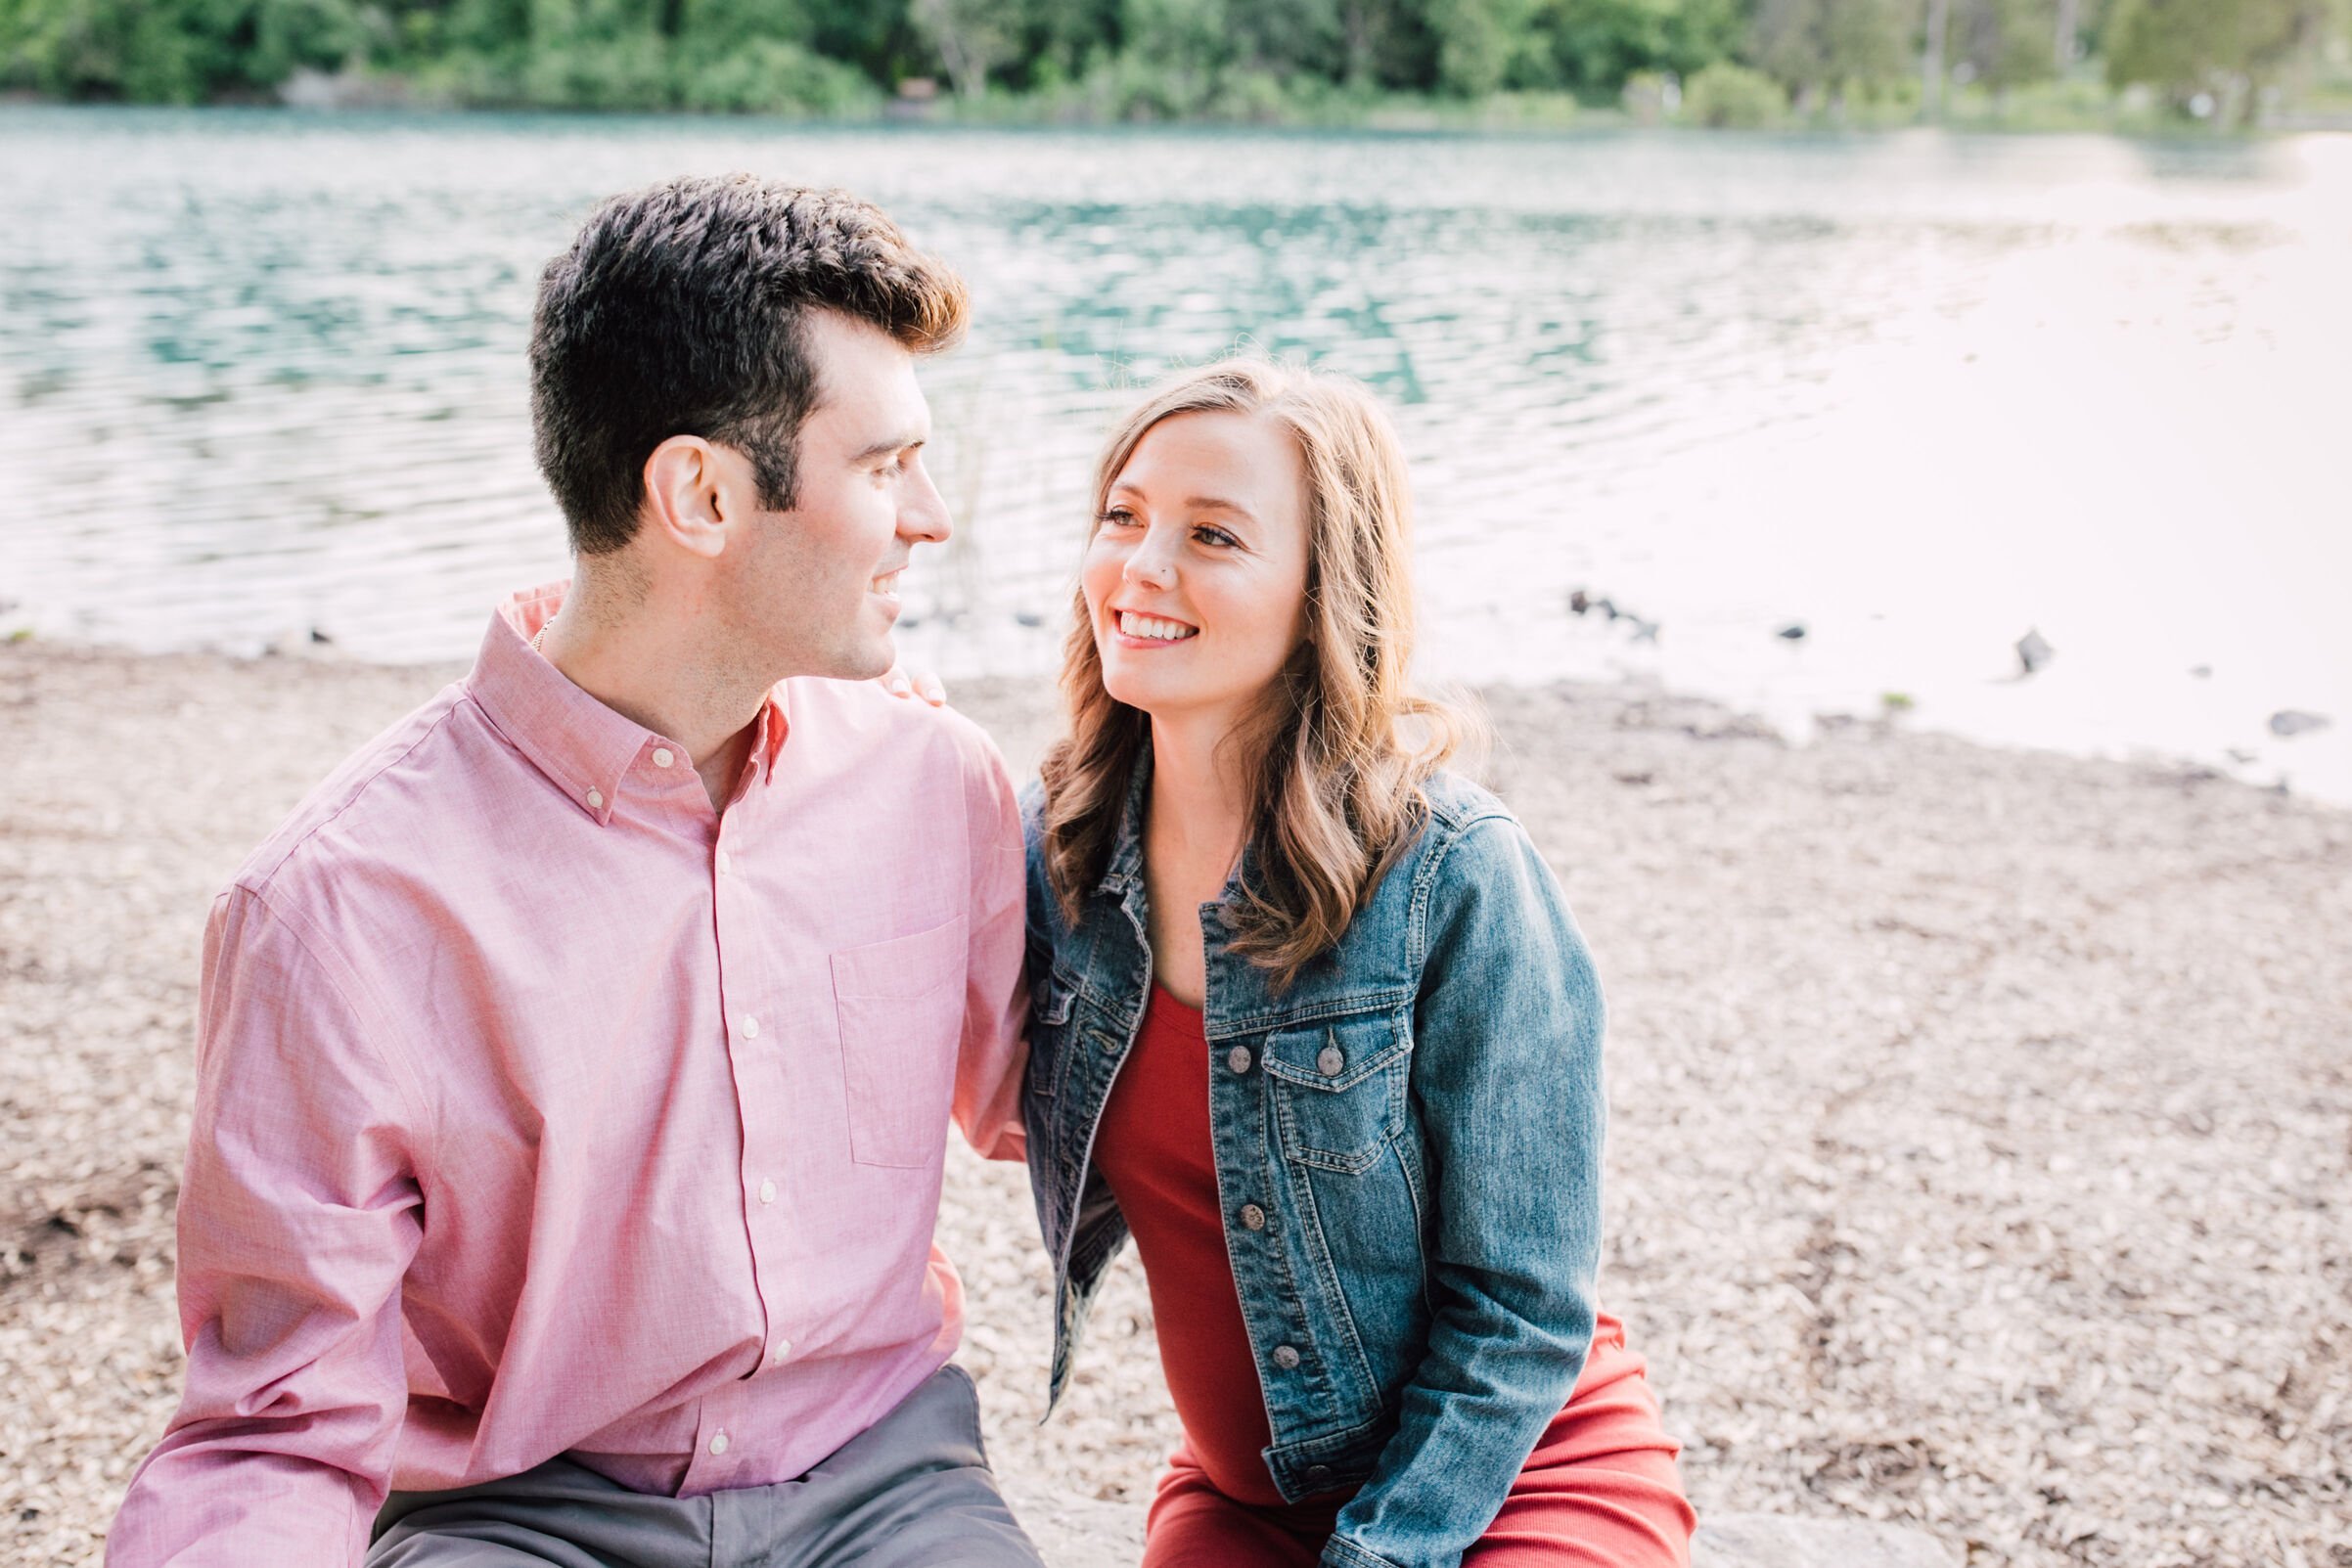  Parents to be smile at each other during pregnancy announcement photo shoot 